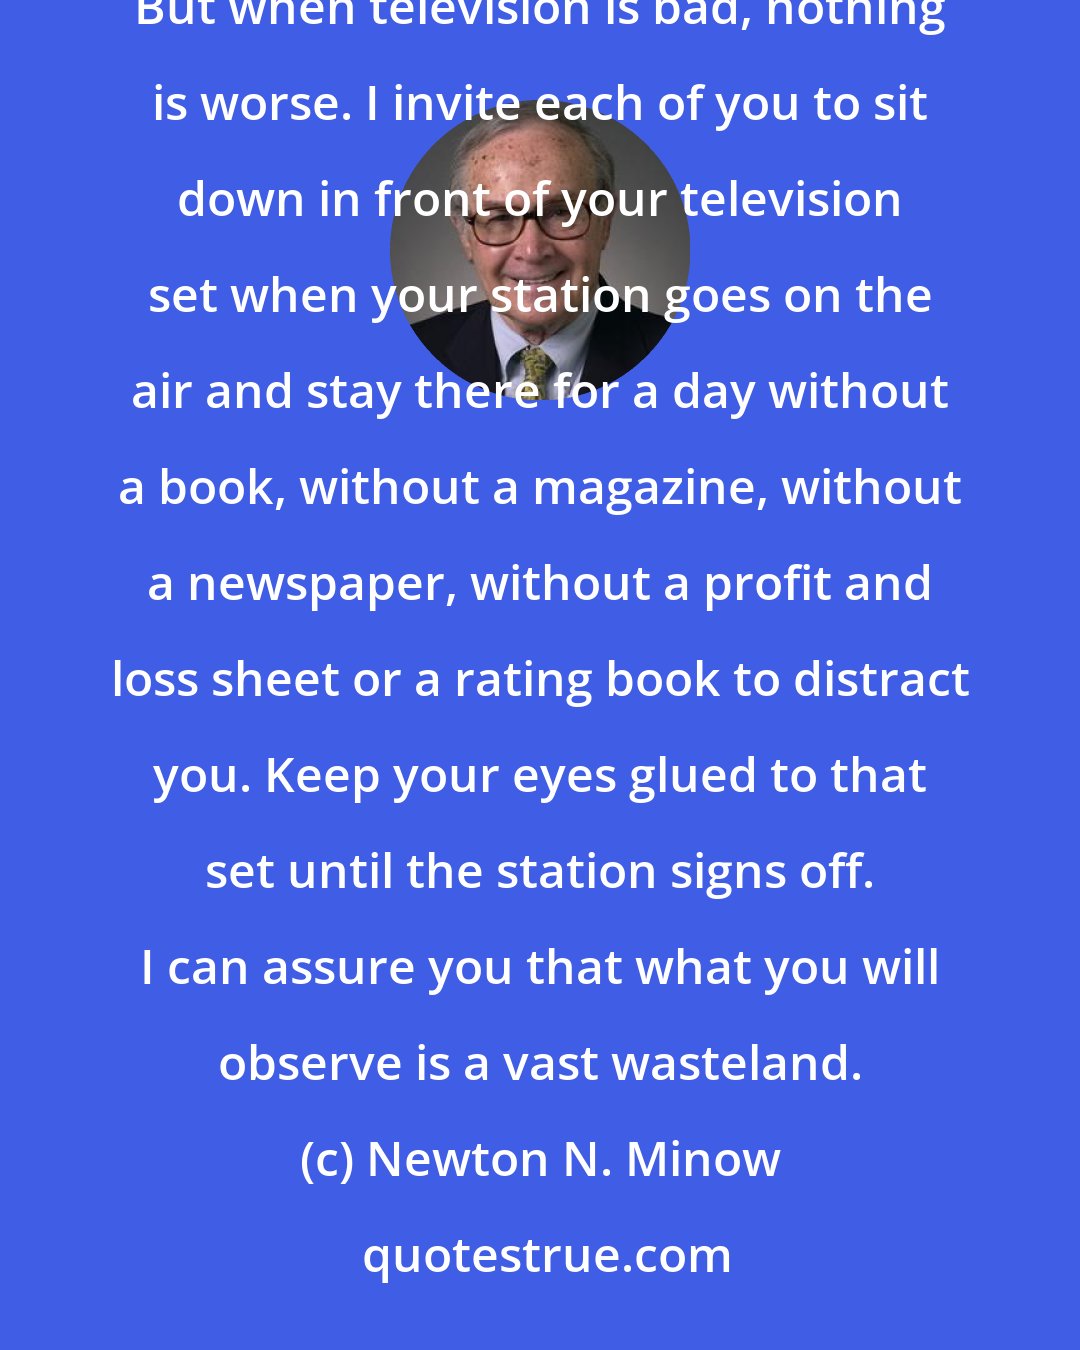 Newton N. Minow: When television is good, nothing - not the theater, not the magazines or newspapers - nothing is better. But when television is bad, nothing is worse. I invite each of you to sit down in front of your television set when your station goes on the air and stay there for a day without a book, without a magazine, without a newspaper, without a profit and loss sheet or a rating book to distract you. Keep your eyes glued to that set until the station signs off. I can assure you that what you will observe is a vast wasteland.